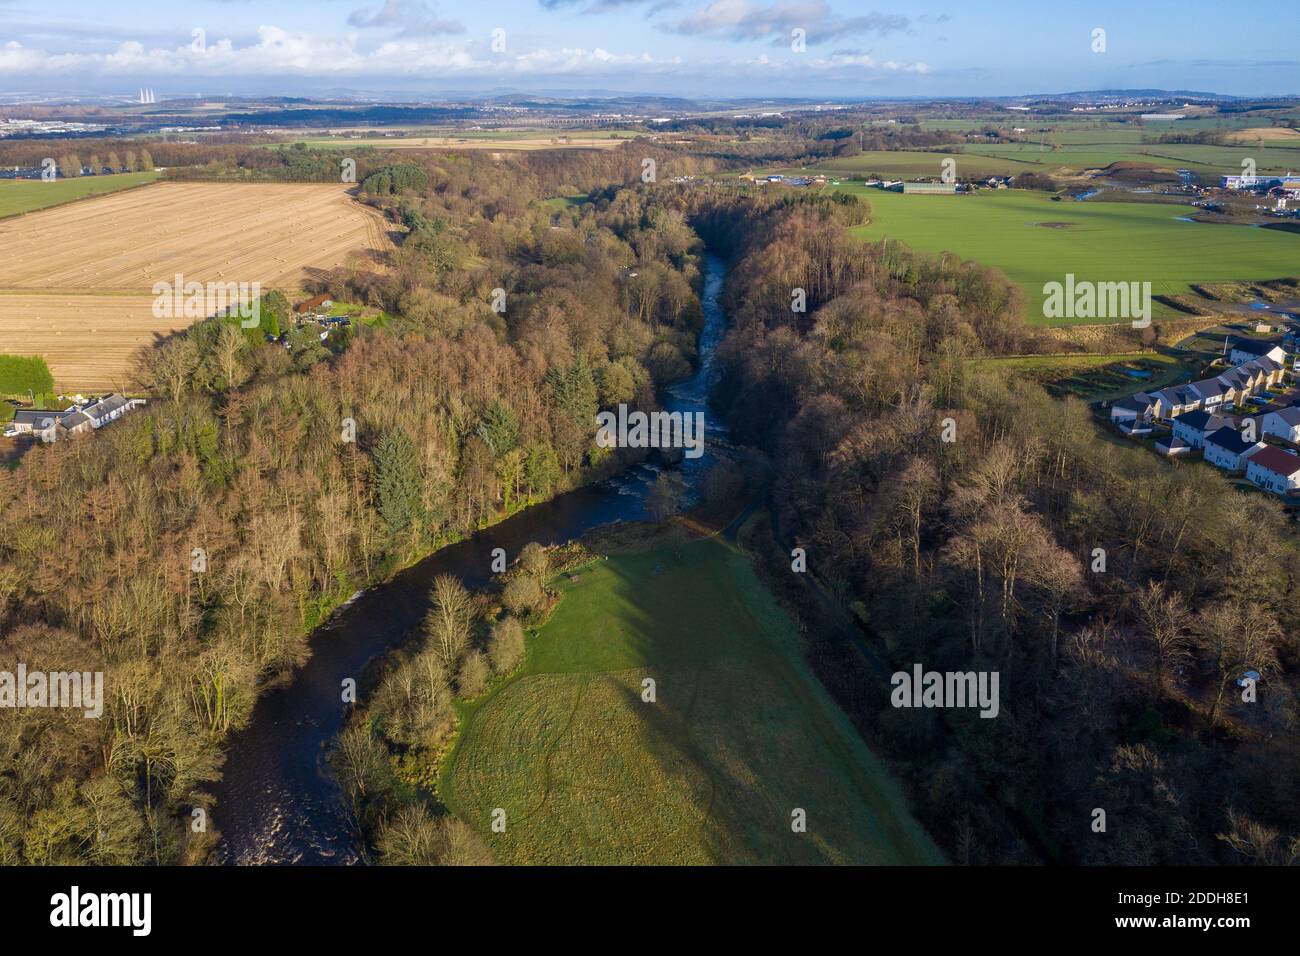 Aerial view of the River Almond in the Almondell and Calderwood Country park, East Calder, West Lothian. Stock Photo